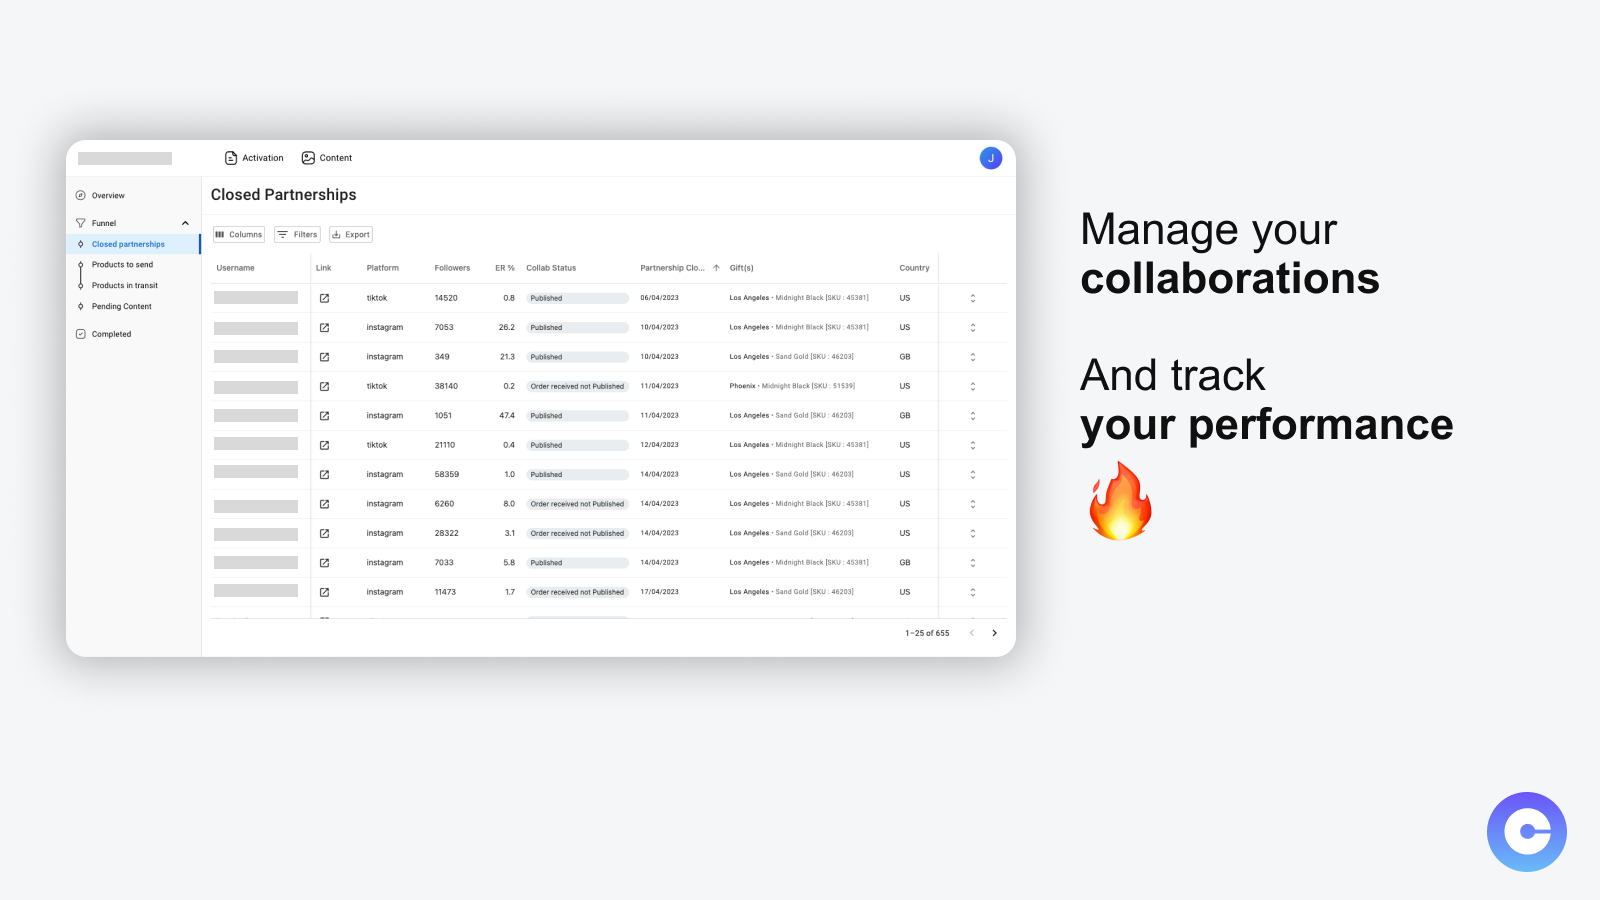 Manage your collaborations easily